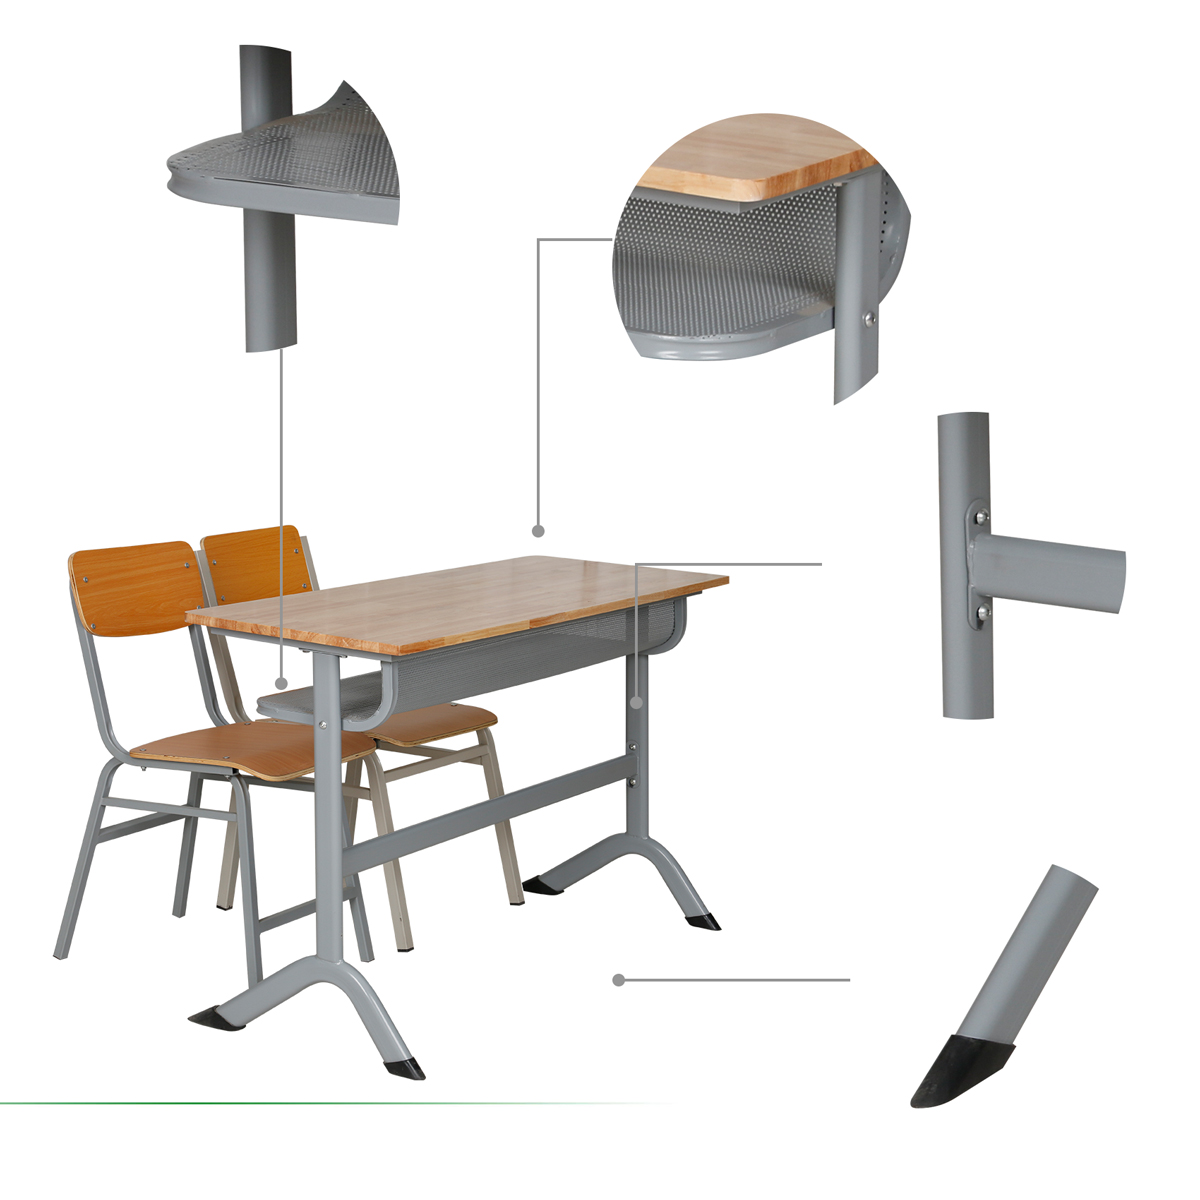 Double Study Table and Chair 2.jpg